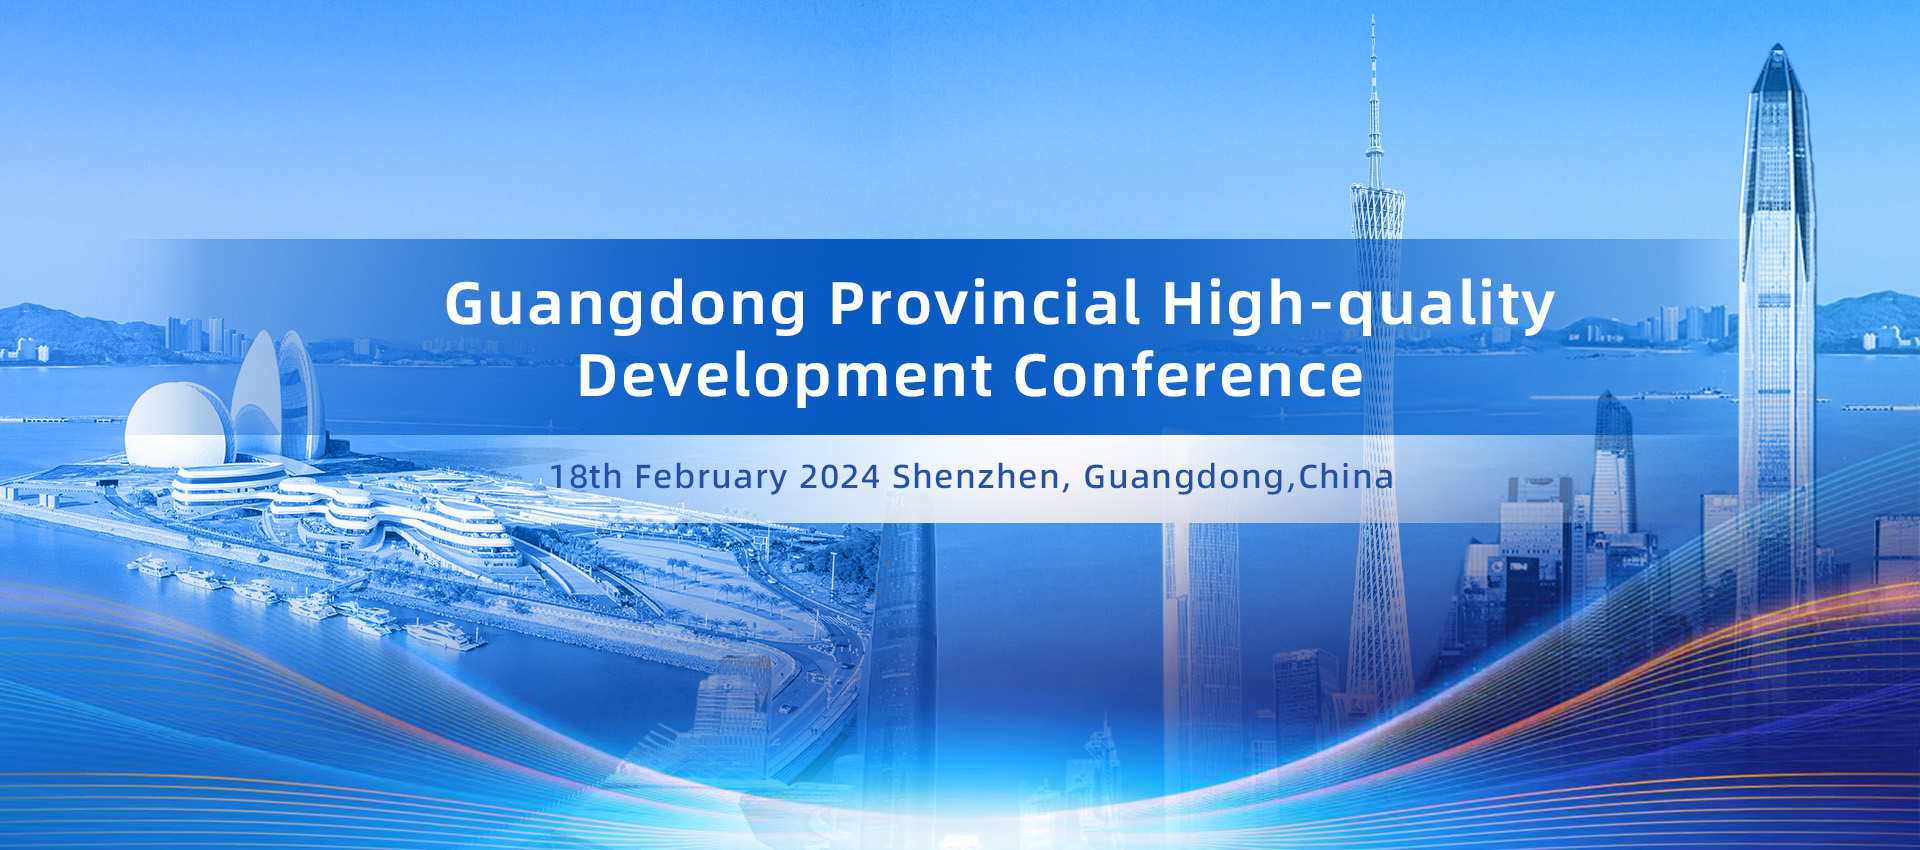 Guangdong Provincial High-quality Development Conference